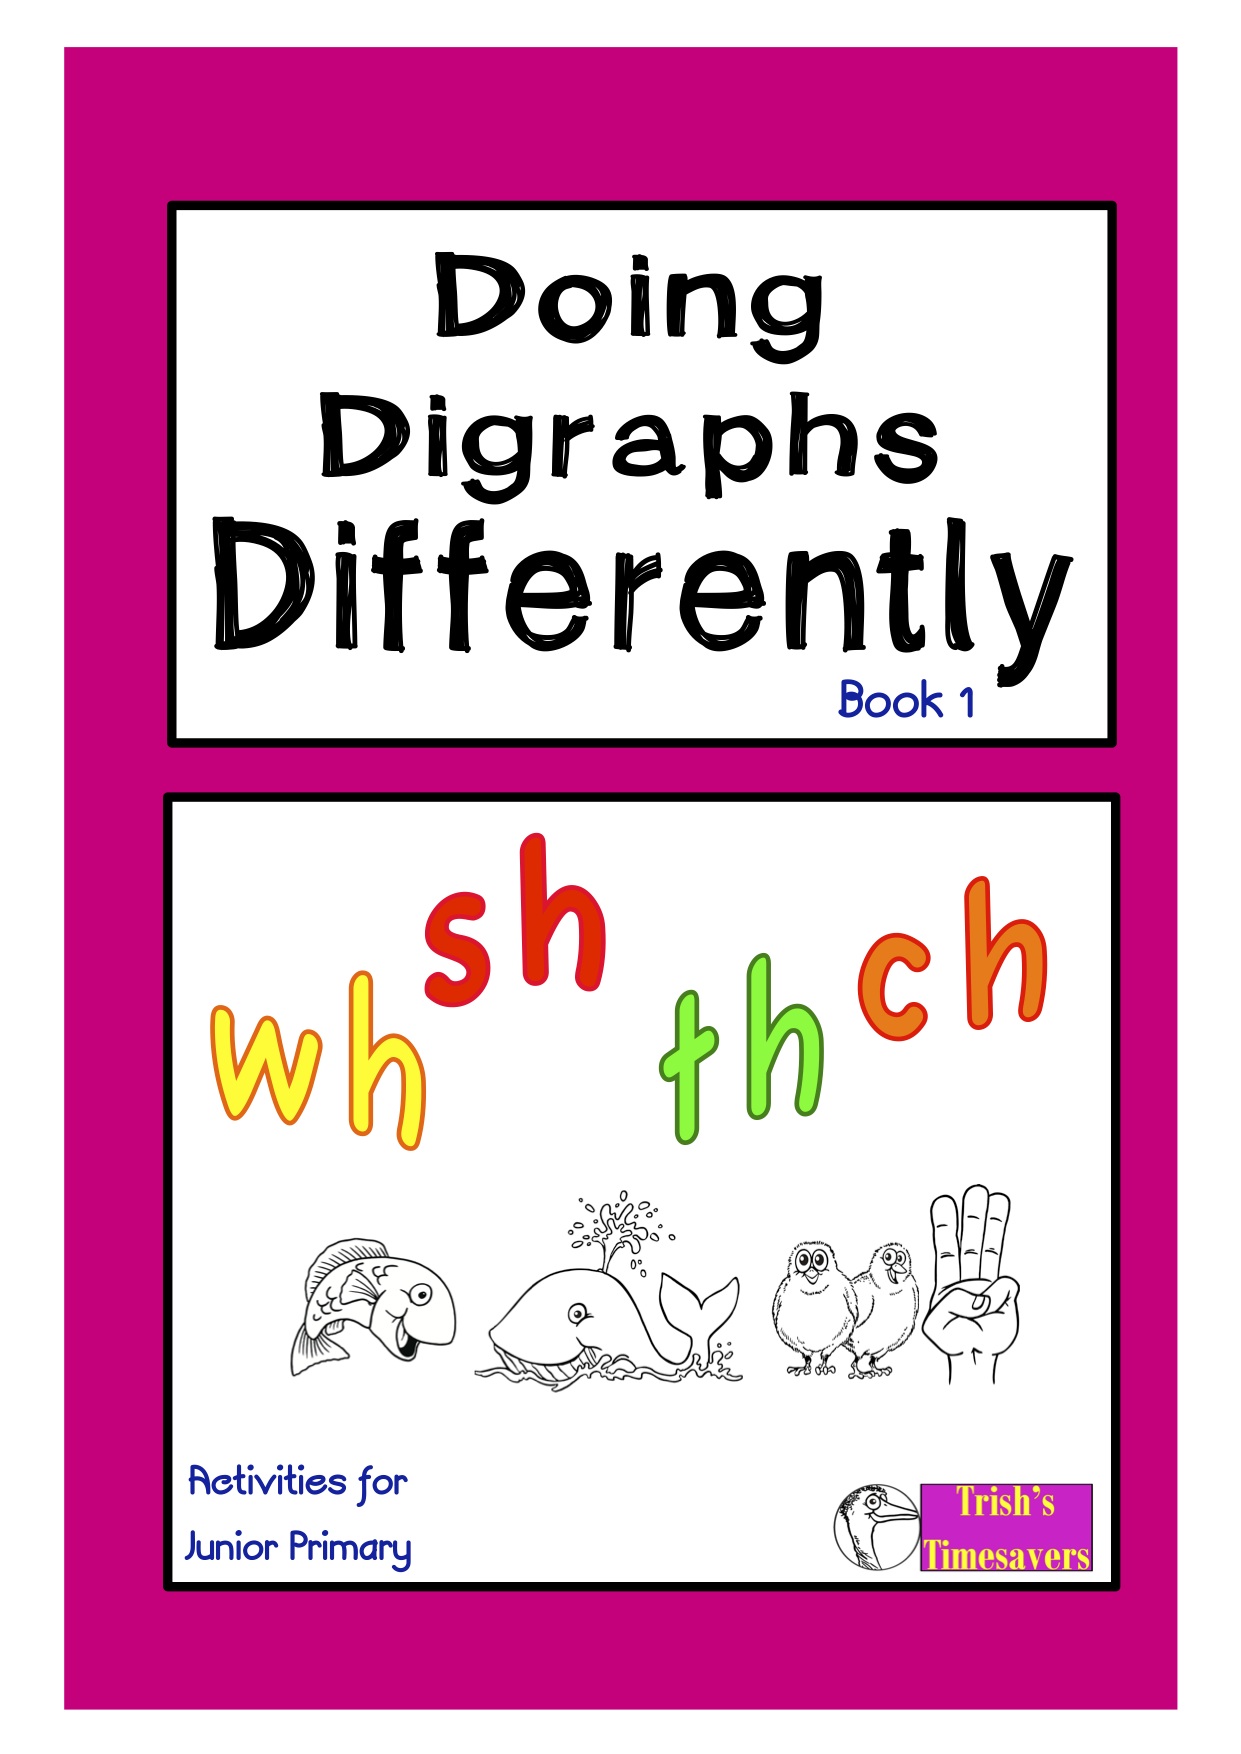 Doing Digraphs Differently Book 1